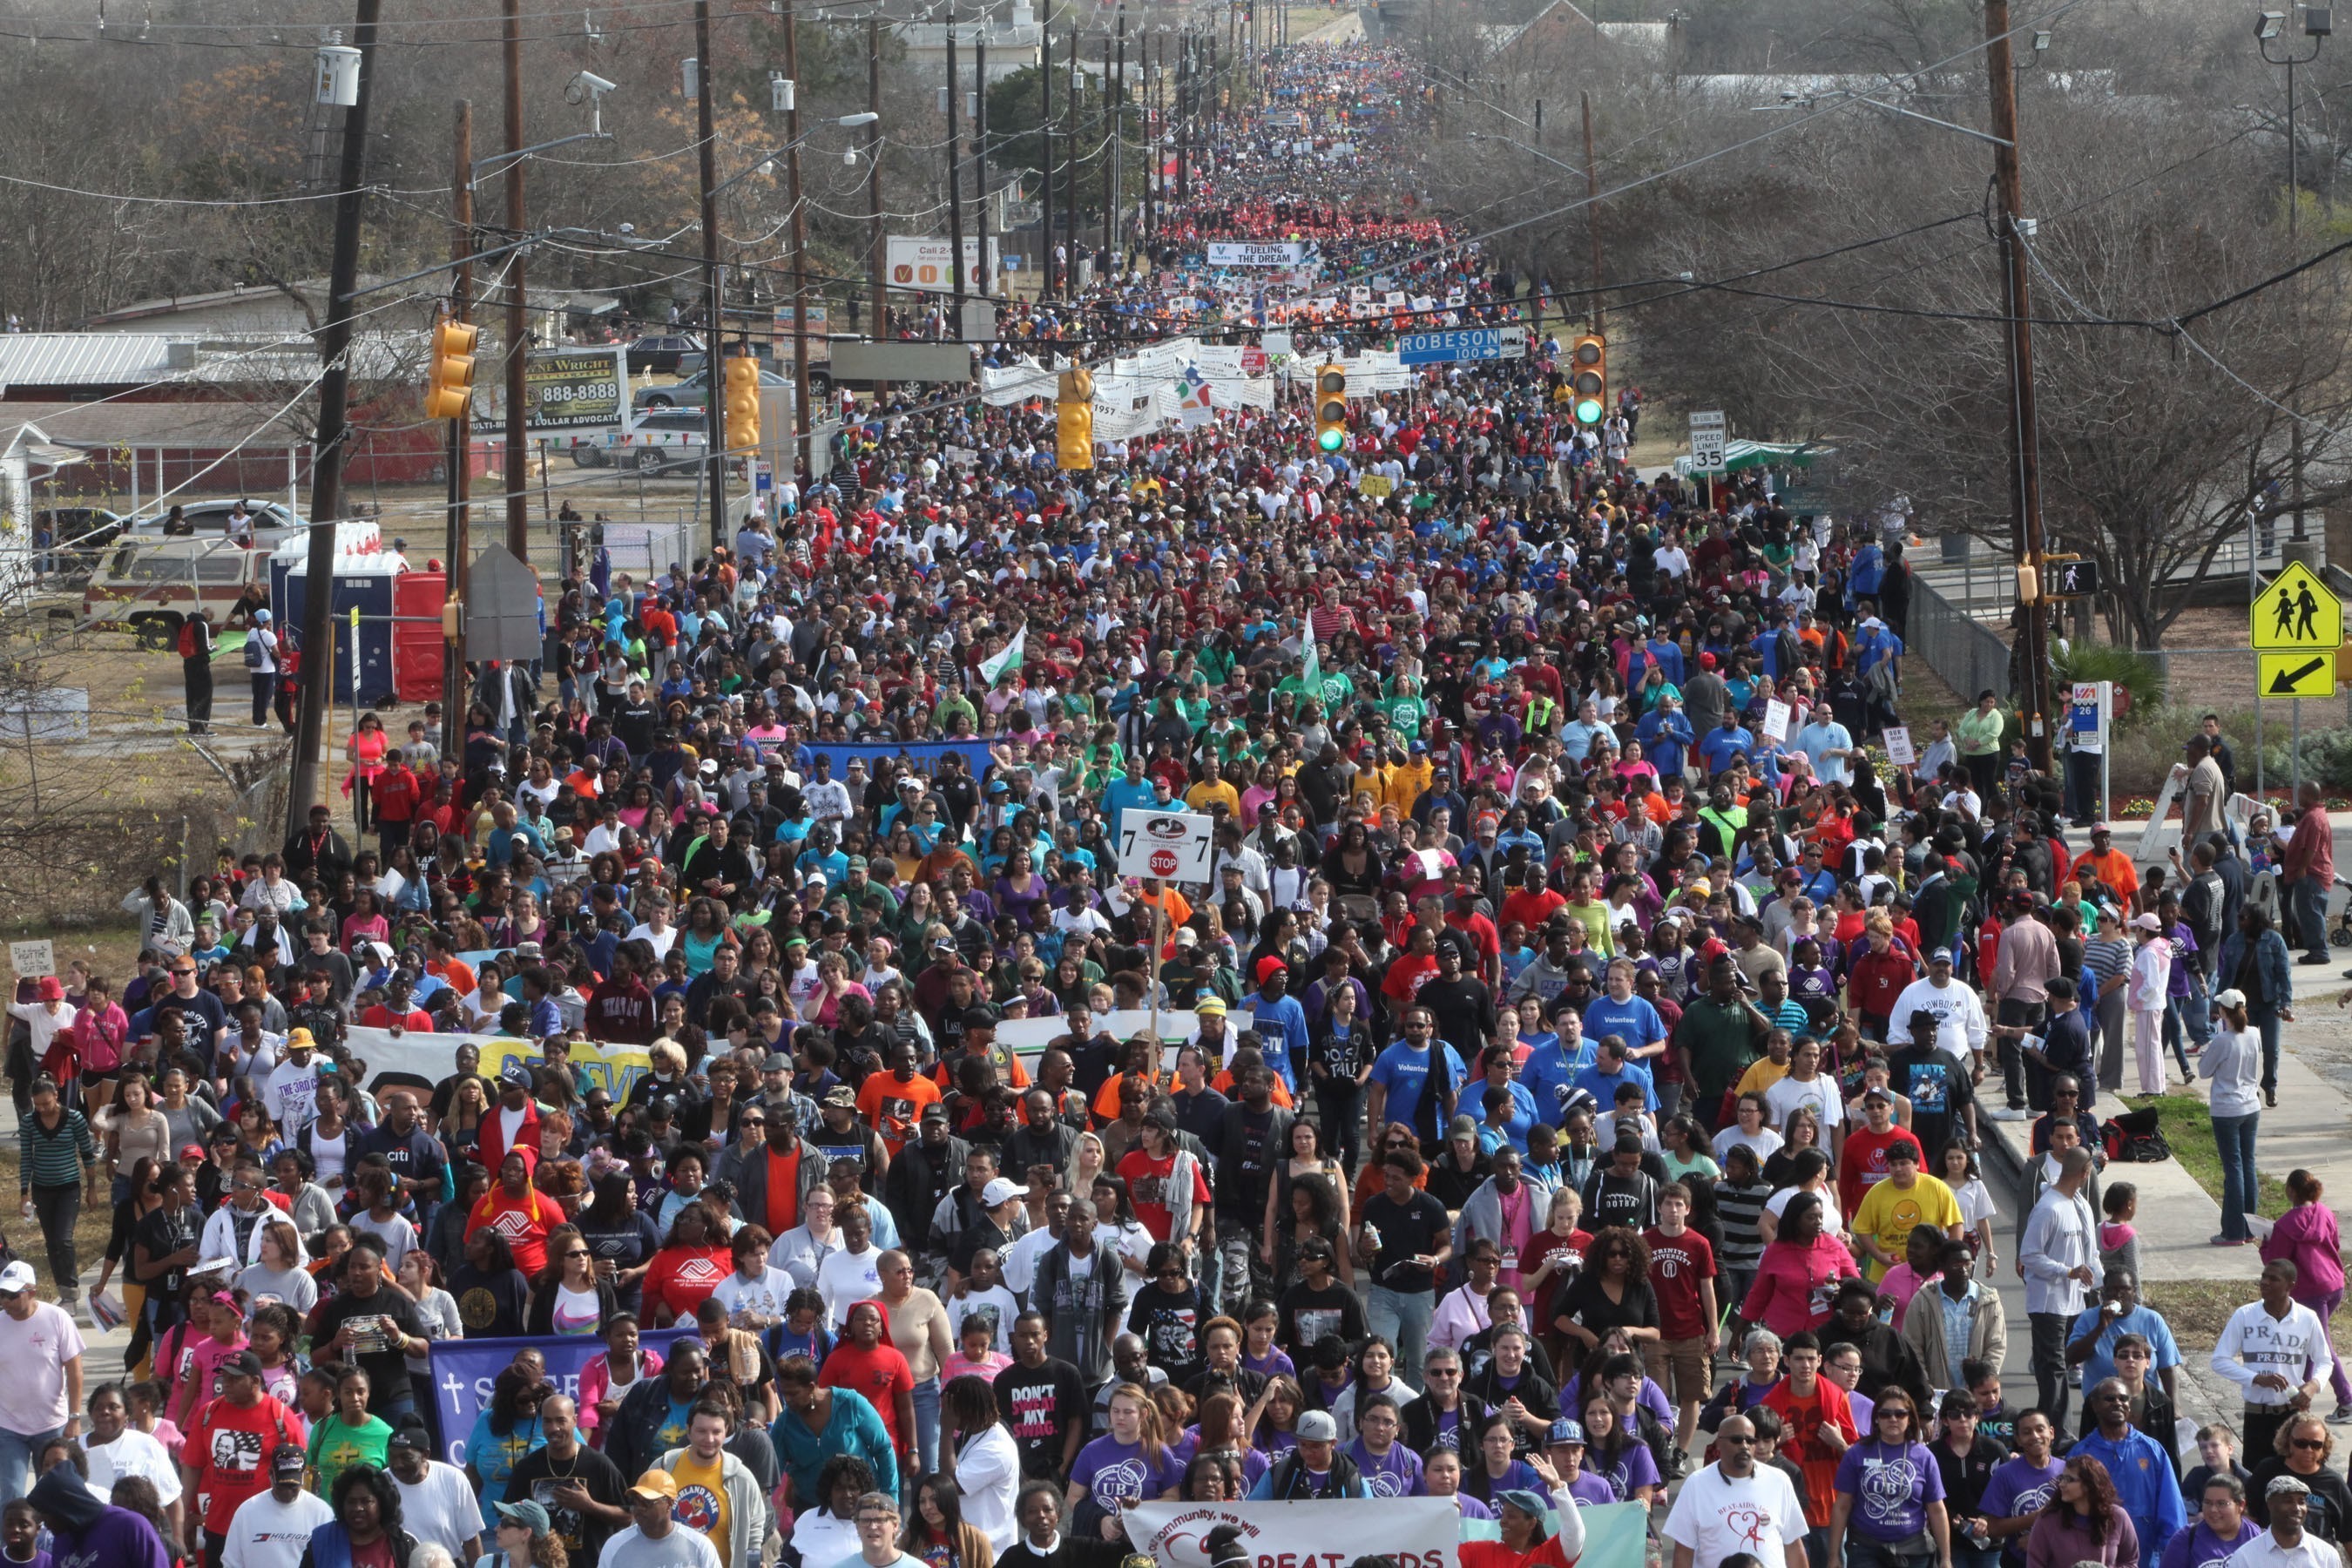 Each year more than 150,000 people participate in the City of San Antonio-sponsored march honoring the life and legacy of Martin Luther King, Jr. as part of an annual citywide commemoration. San Antonio is home to one of the largest marches in the nation honoring Dr. King.